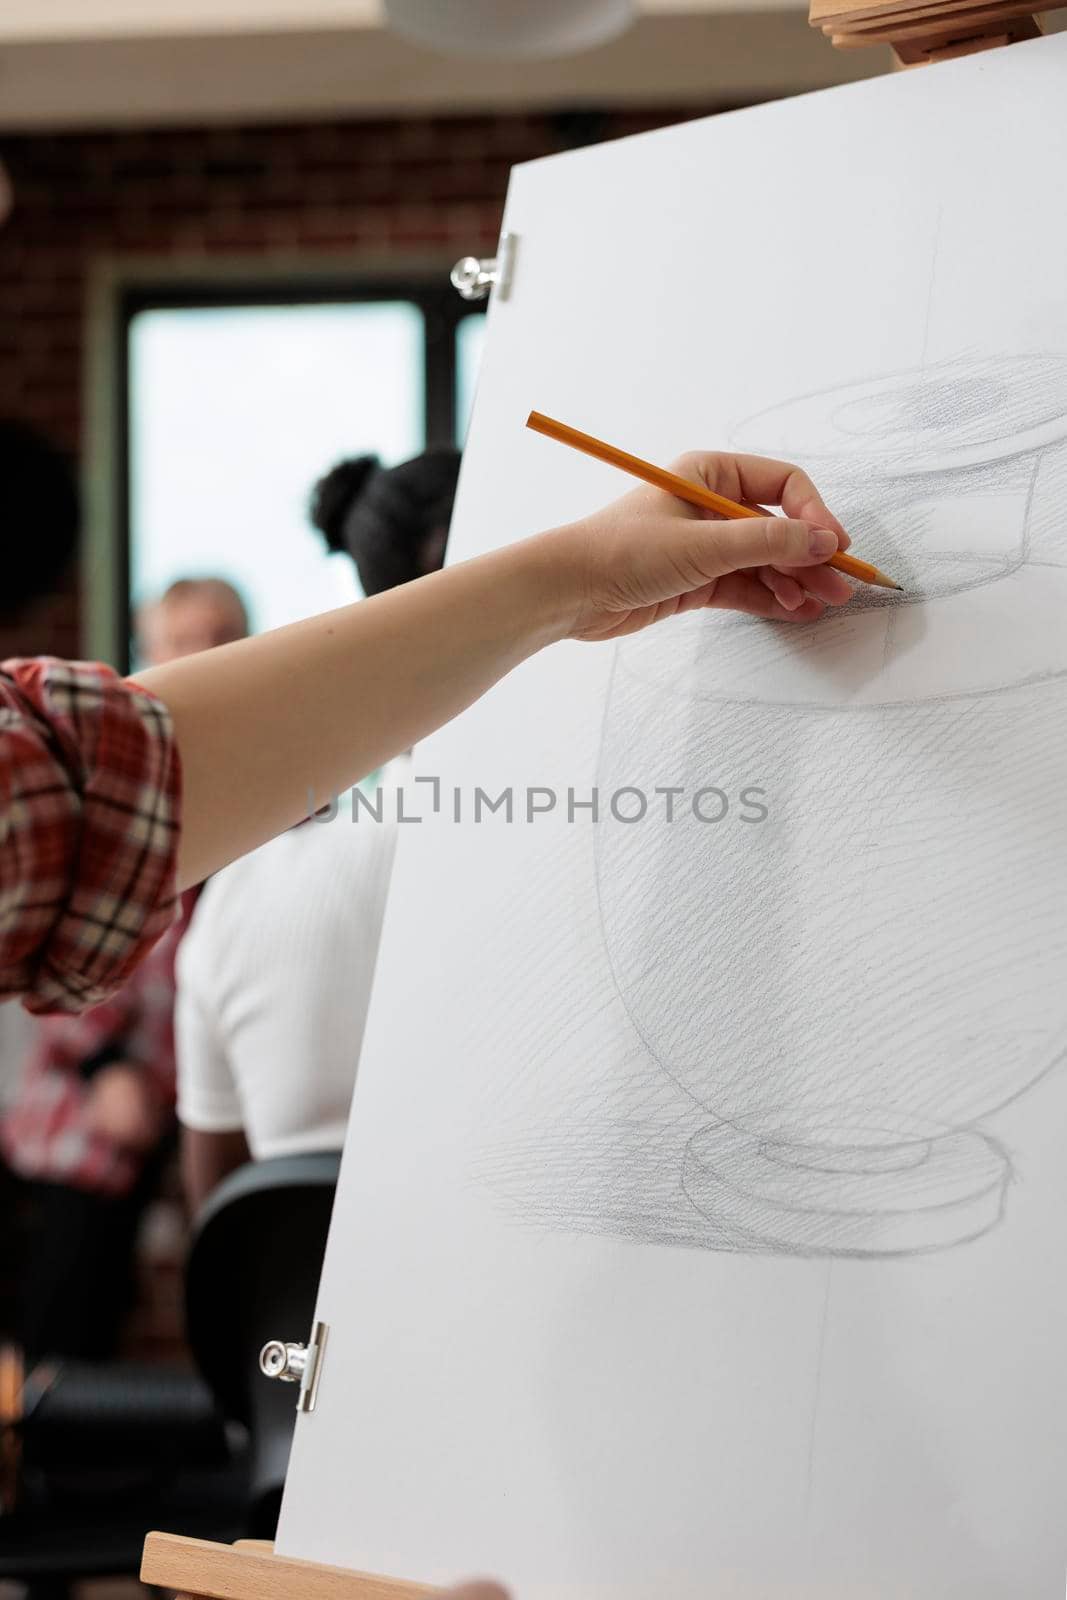 Artist man drawing vase sketch on white canvas working at graphic illustration using sketching technique during art school. Student painter attending creativity lesson for personal growth